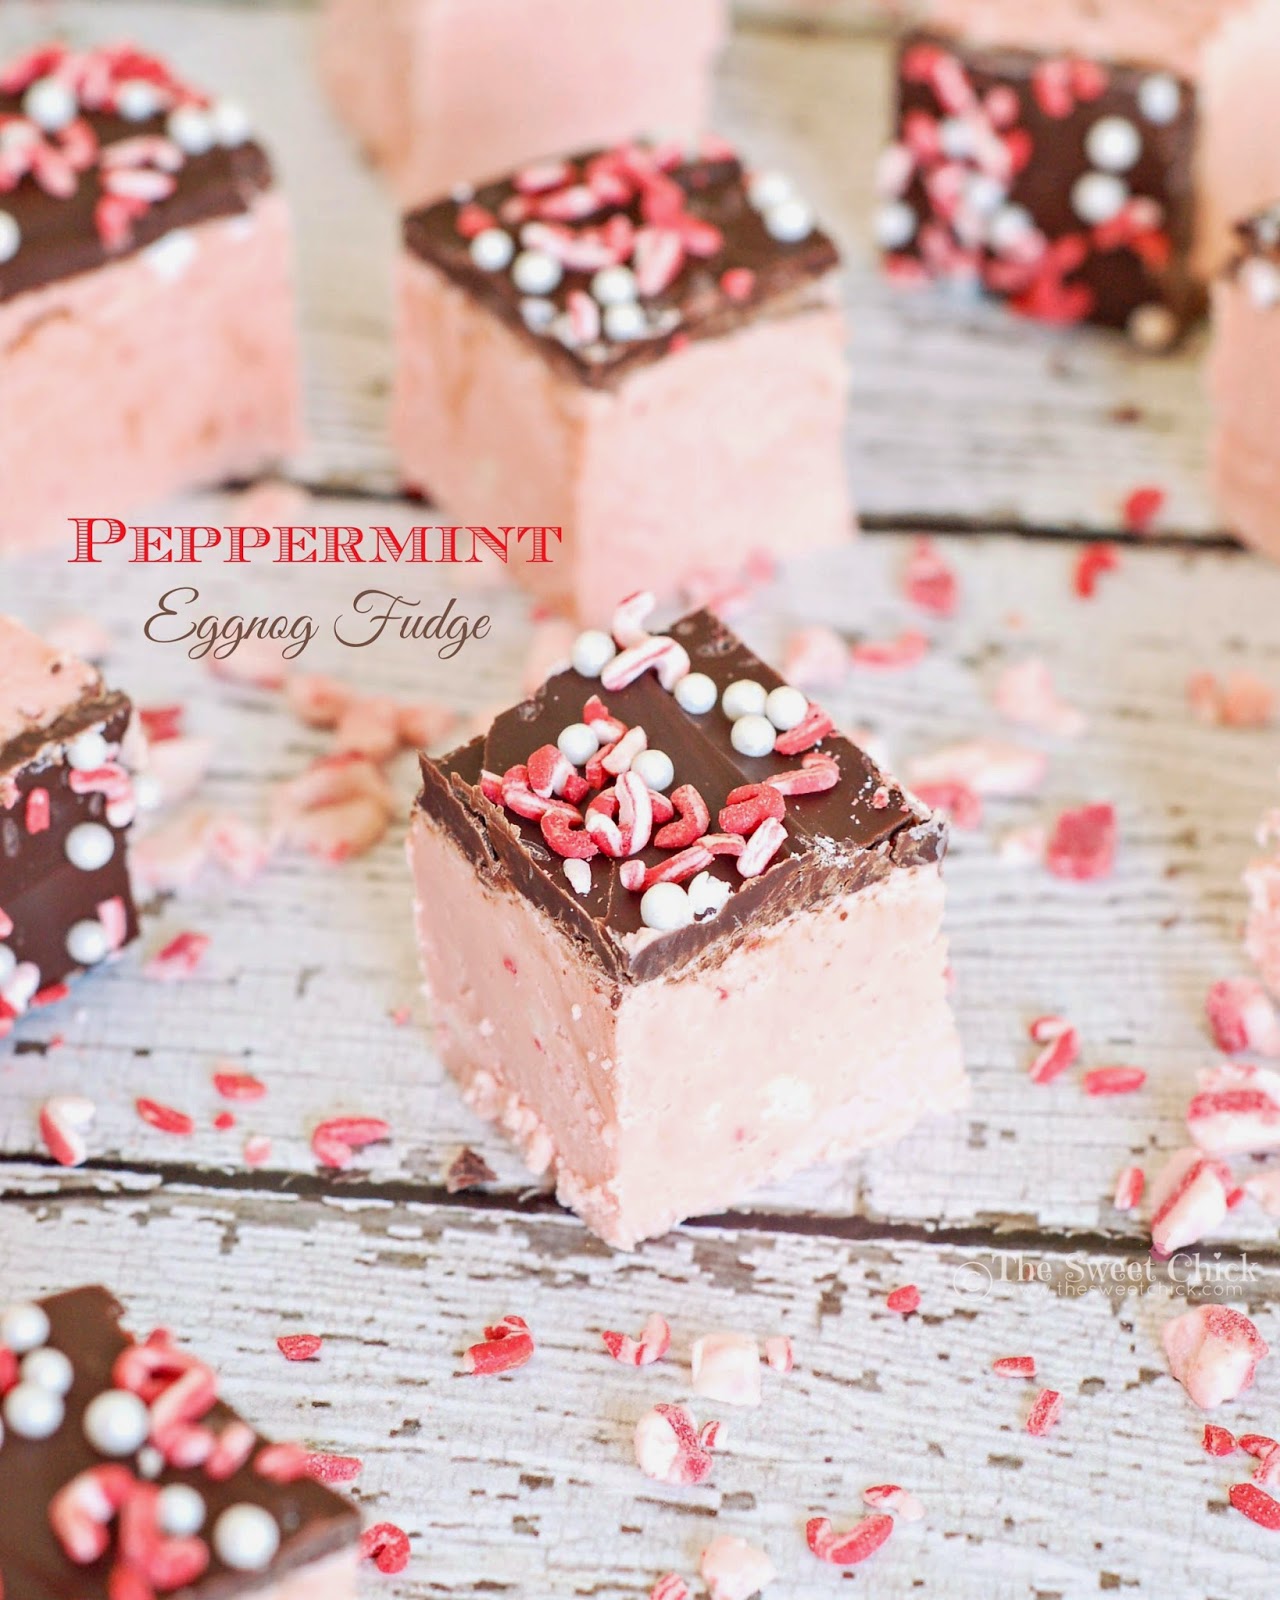 Peppermint Eggnog Fudge by The Sweet Chick